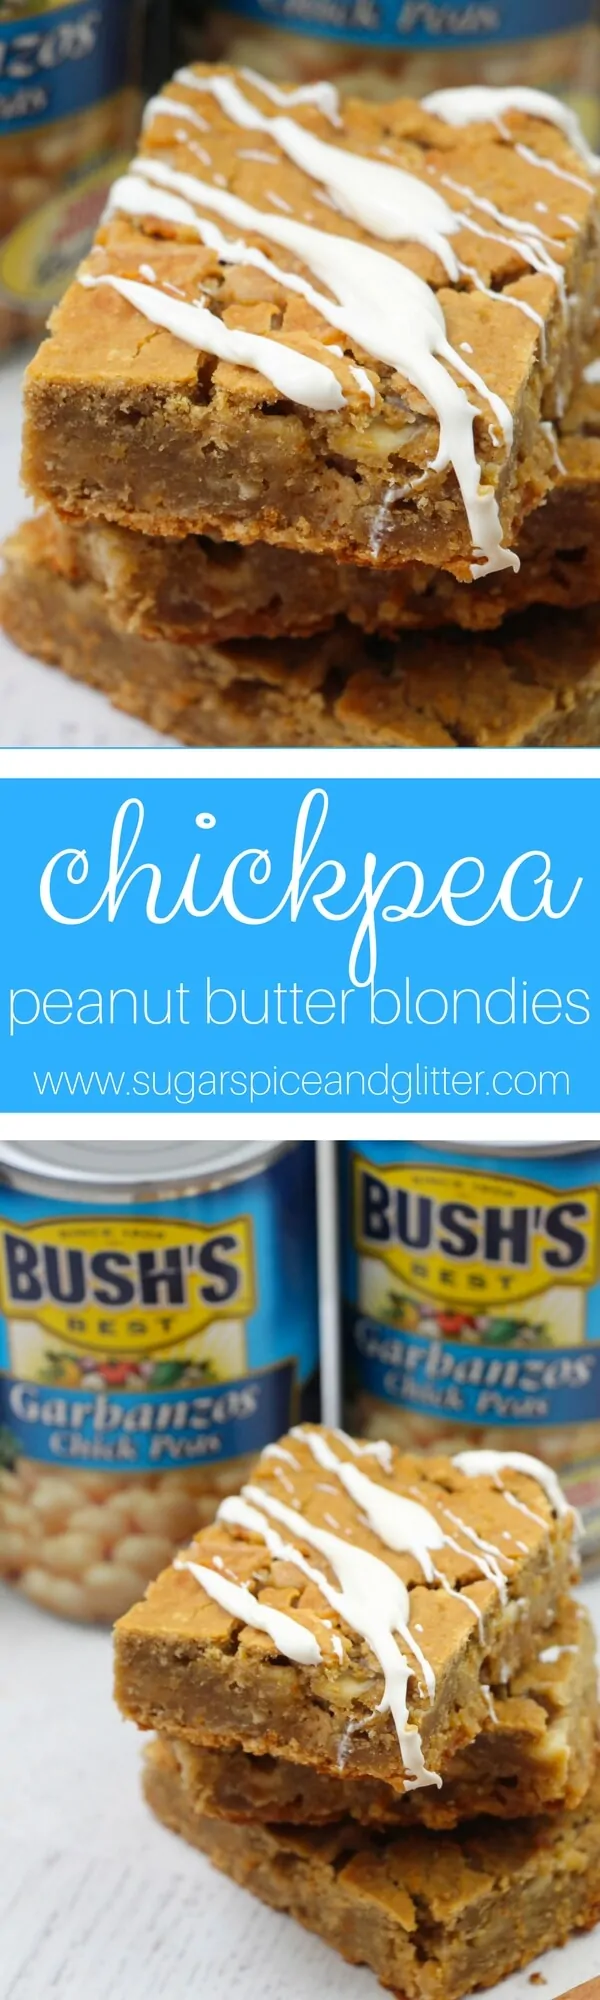 Chickpea Peanut Butter Blondies (with Video)